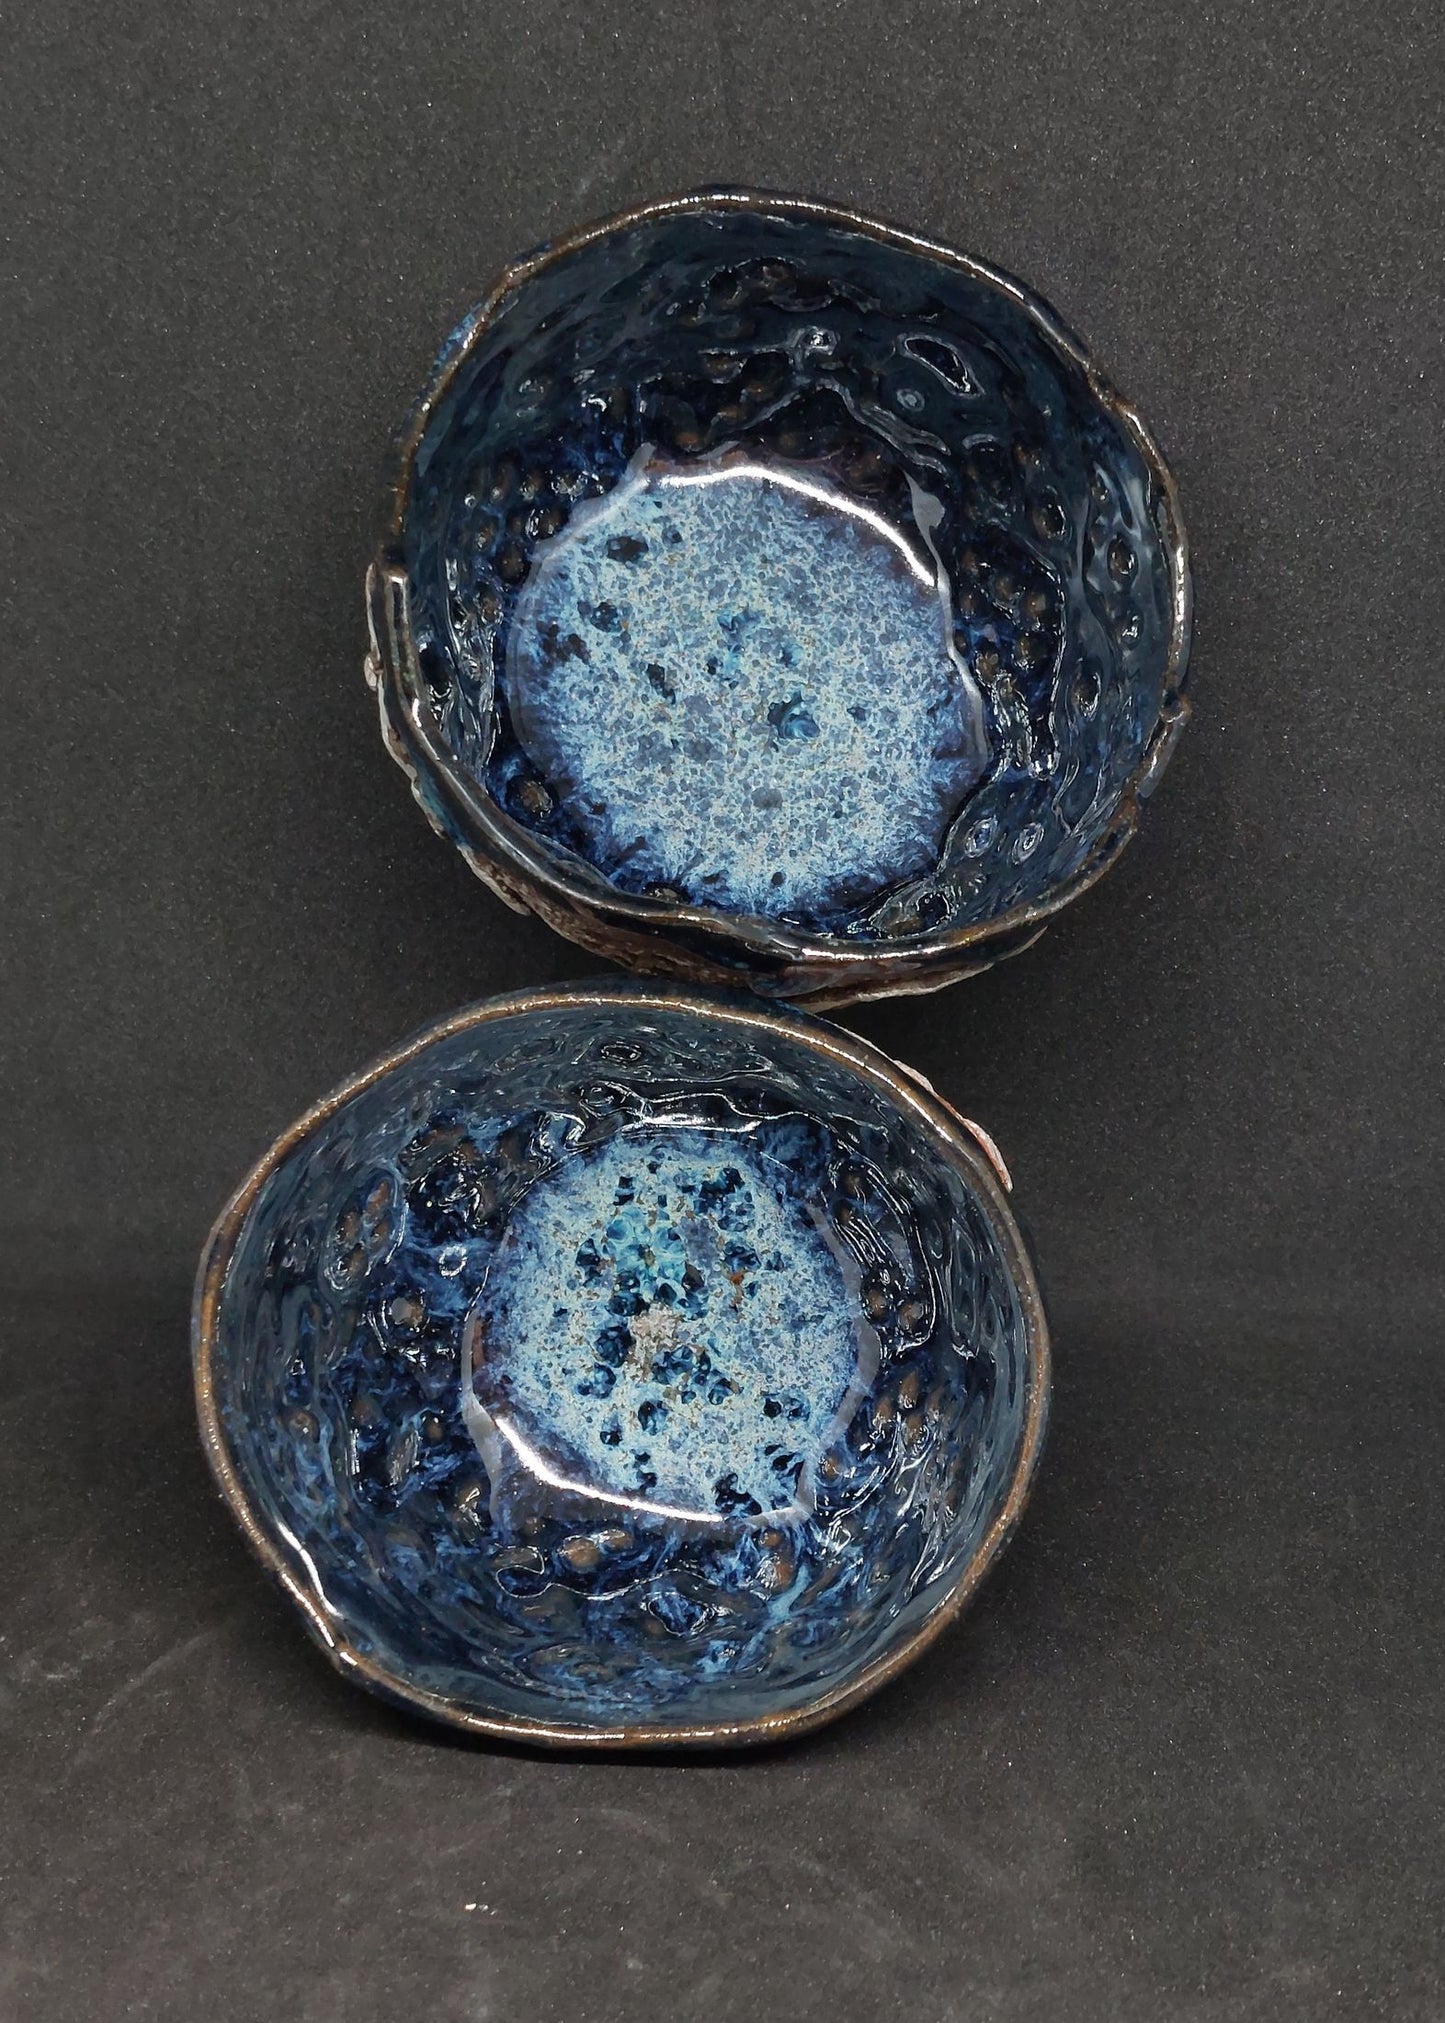 Blue cups on black and red clays - flower patterns